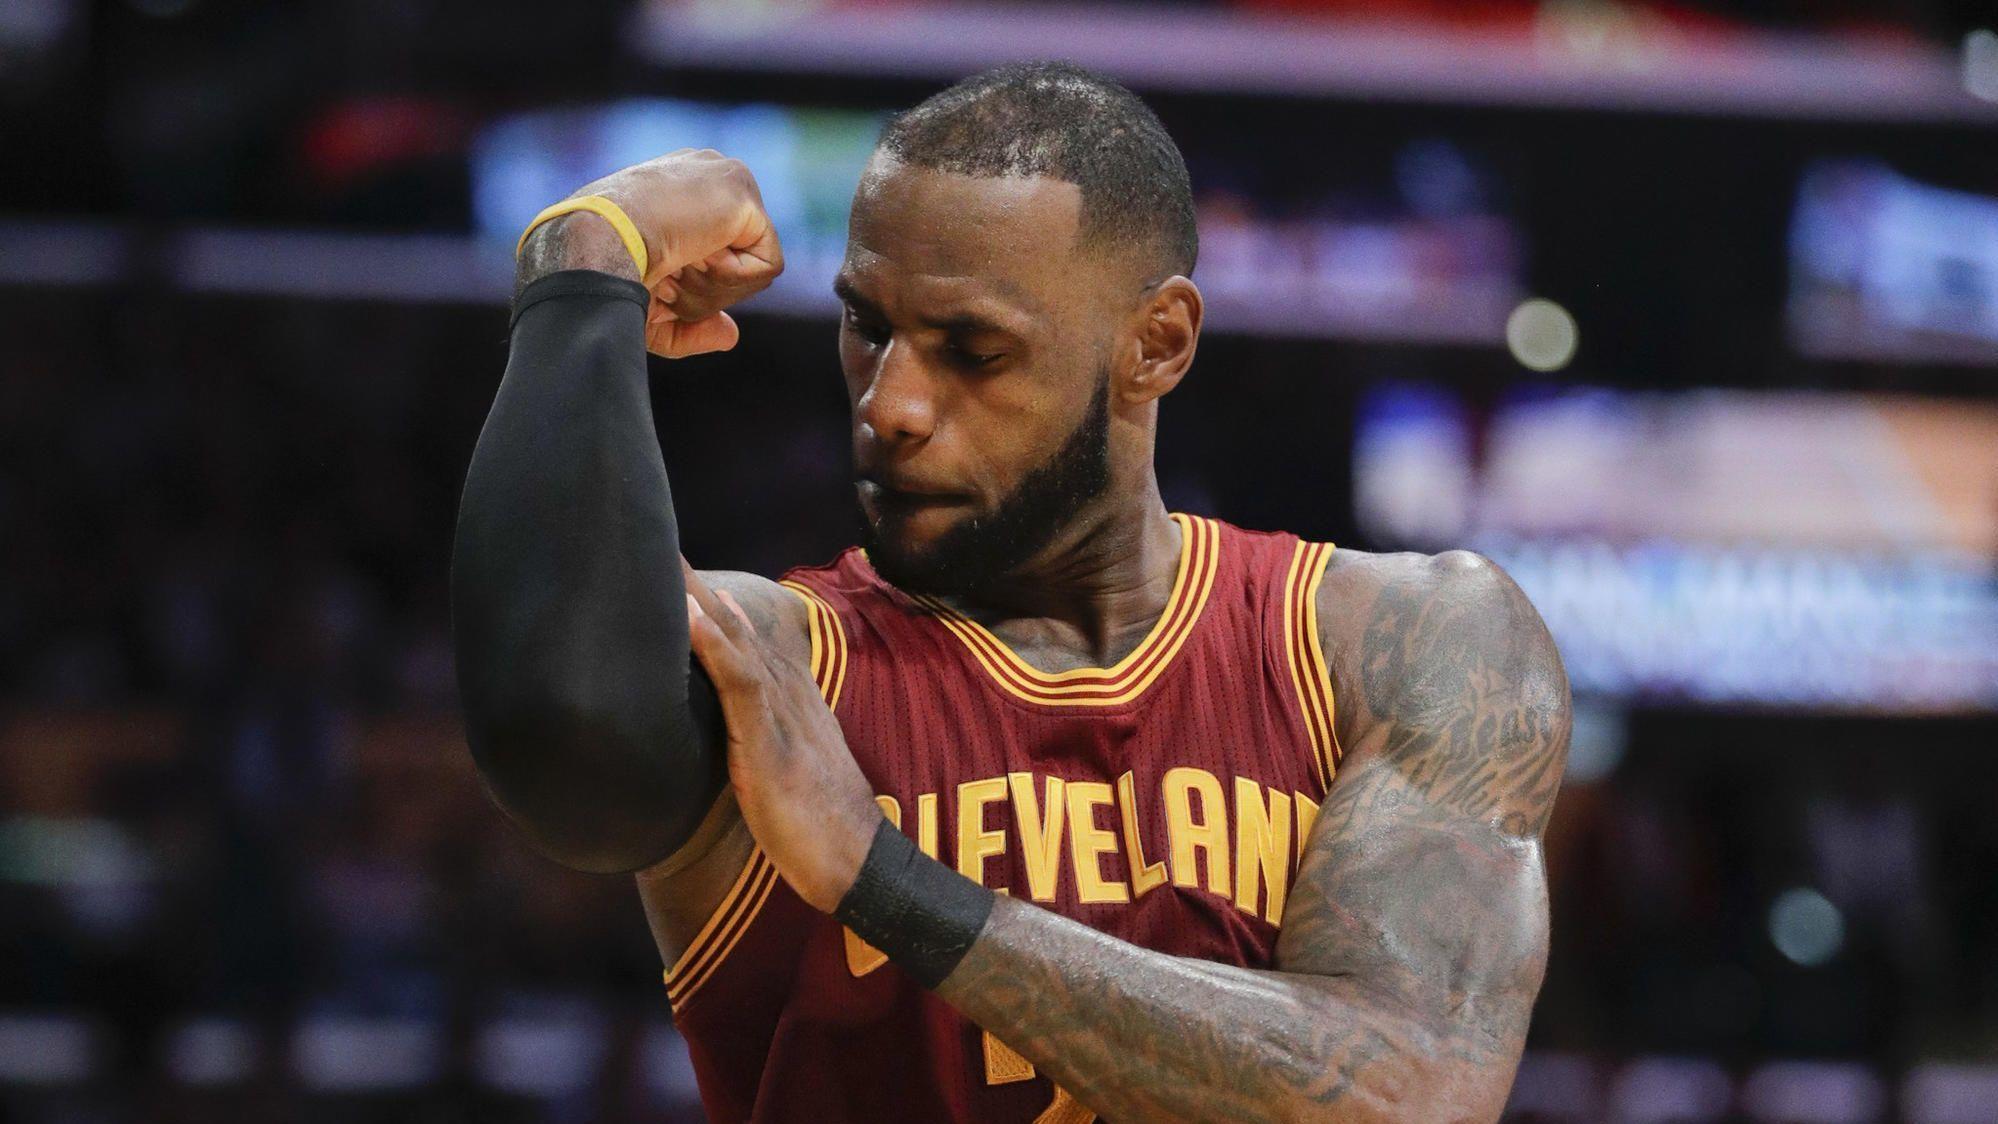 LeBron James agrees to 4-year, $154 million deal with the Lakers - Chicago Tribune